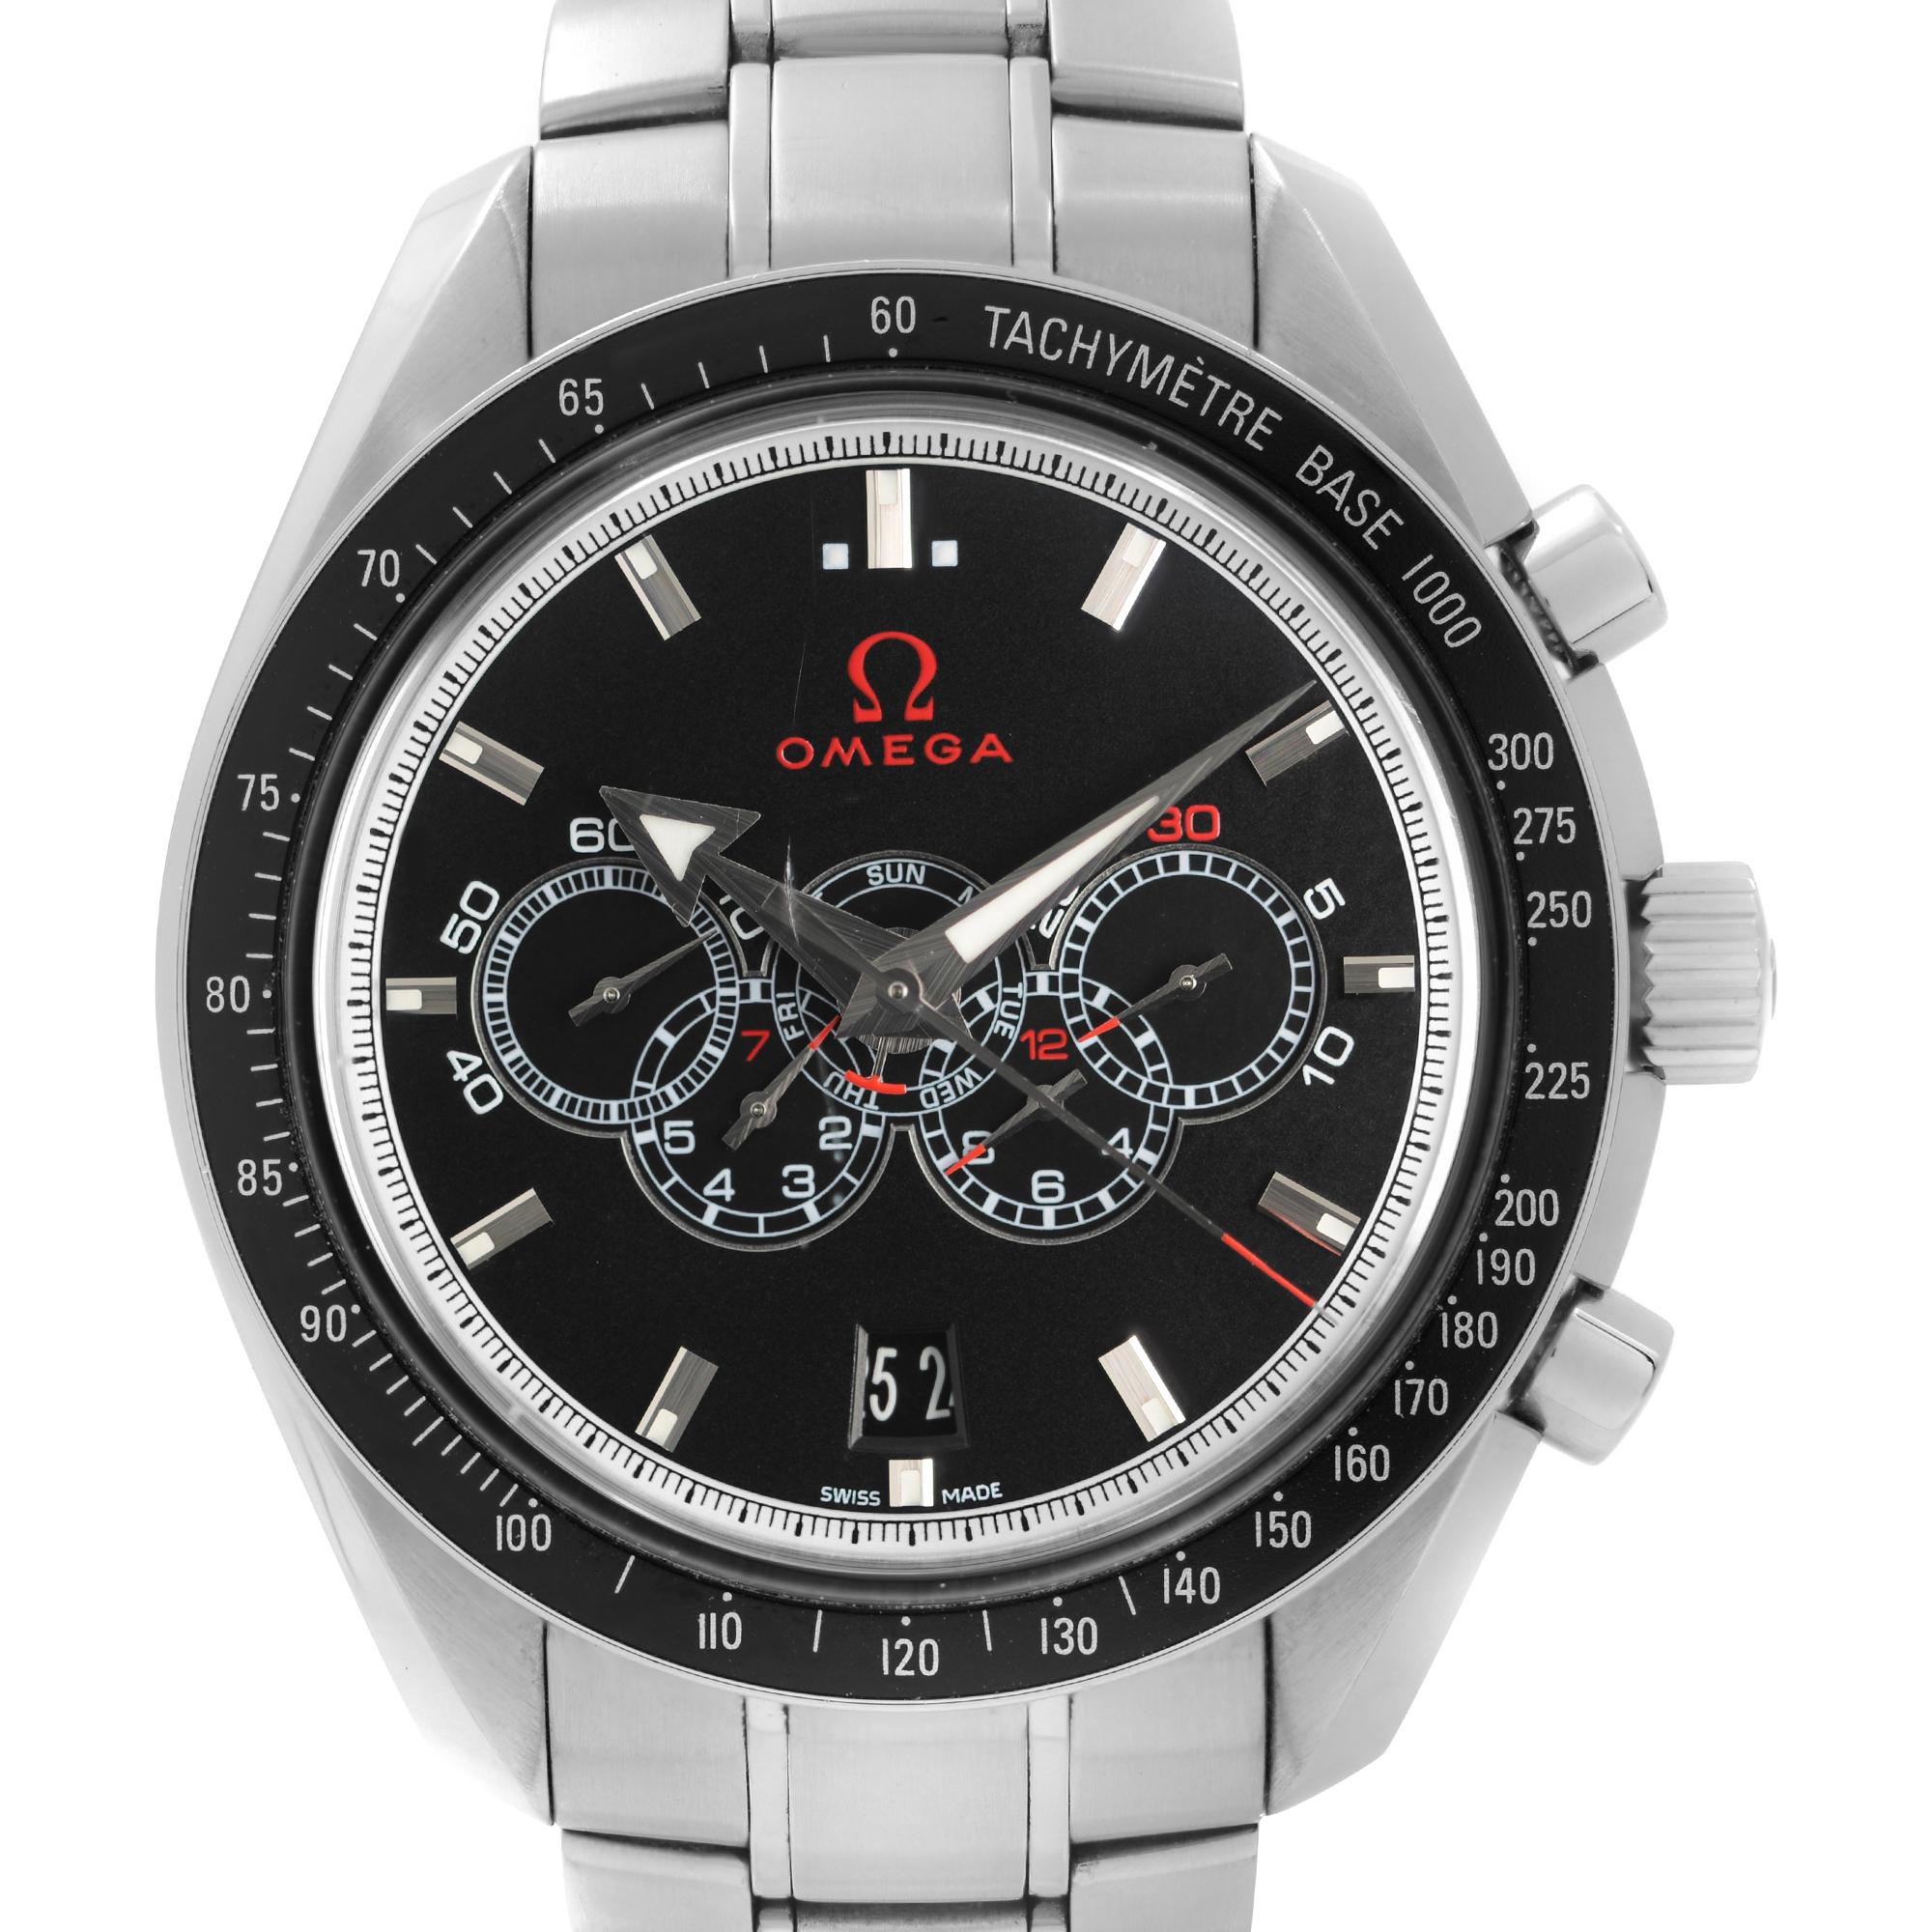 Pre-Owned Omega Broad Arrow Speedmaster Olympic Official Timekeeping 44 mm Stainless Steel Chronograph Day Date Black Dial Men's Automatic Watch 321.30.44.52.01.001. The Timepiece was produced in 2000. The Watch is powered by an Automatic Movement